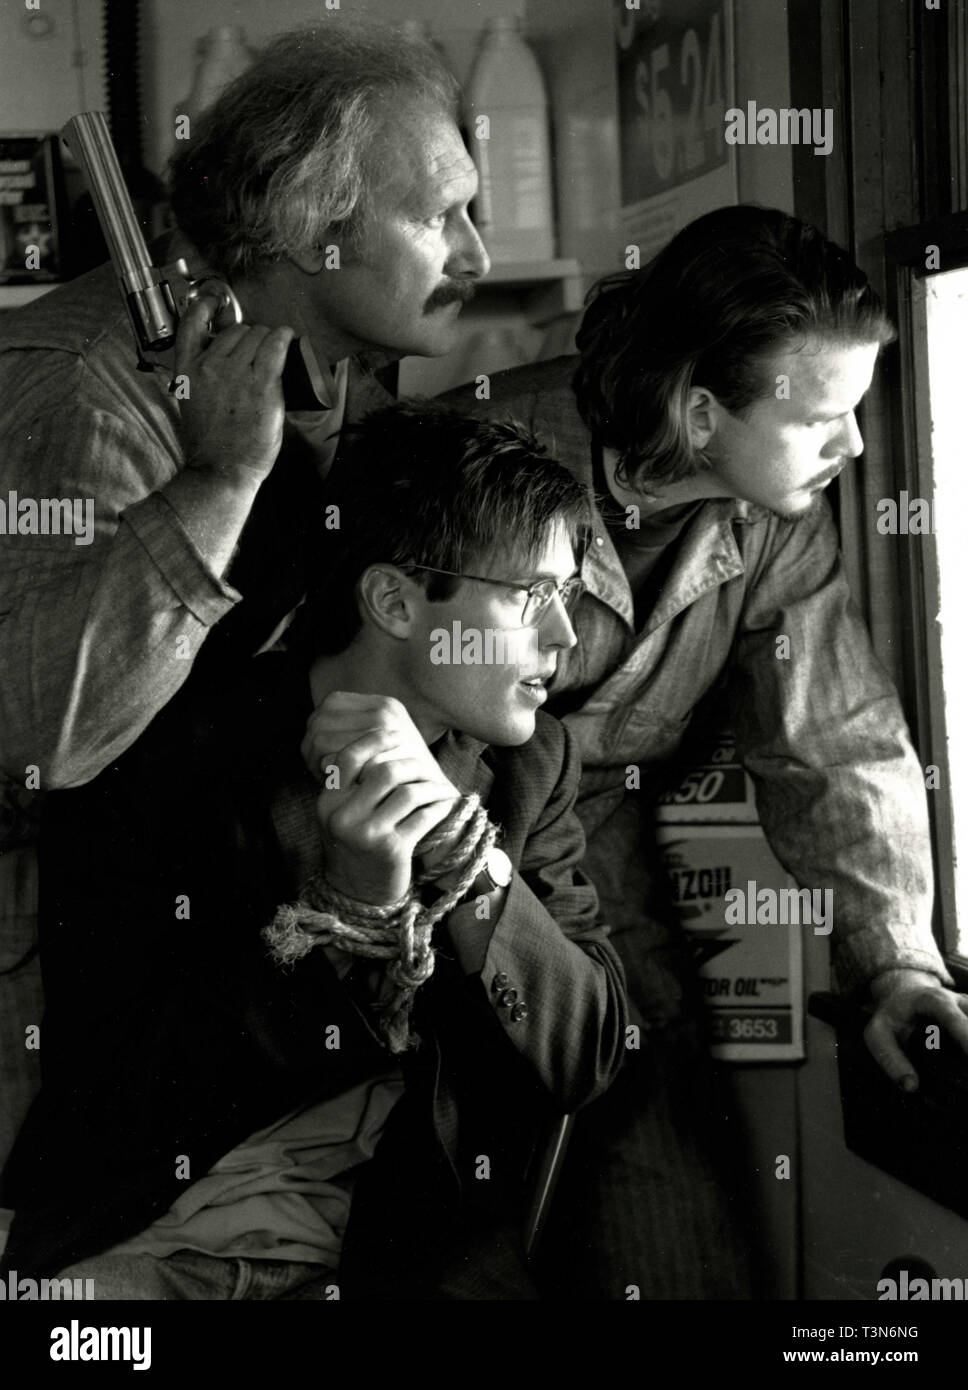 Chris Cooke, Bill Sage, and Mark Bailey in the movie Simple Men, 1992 Stock Photo